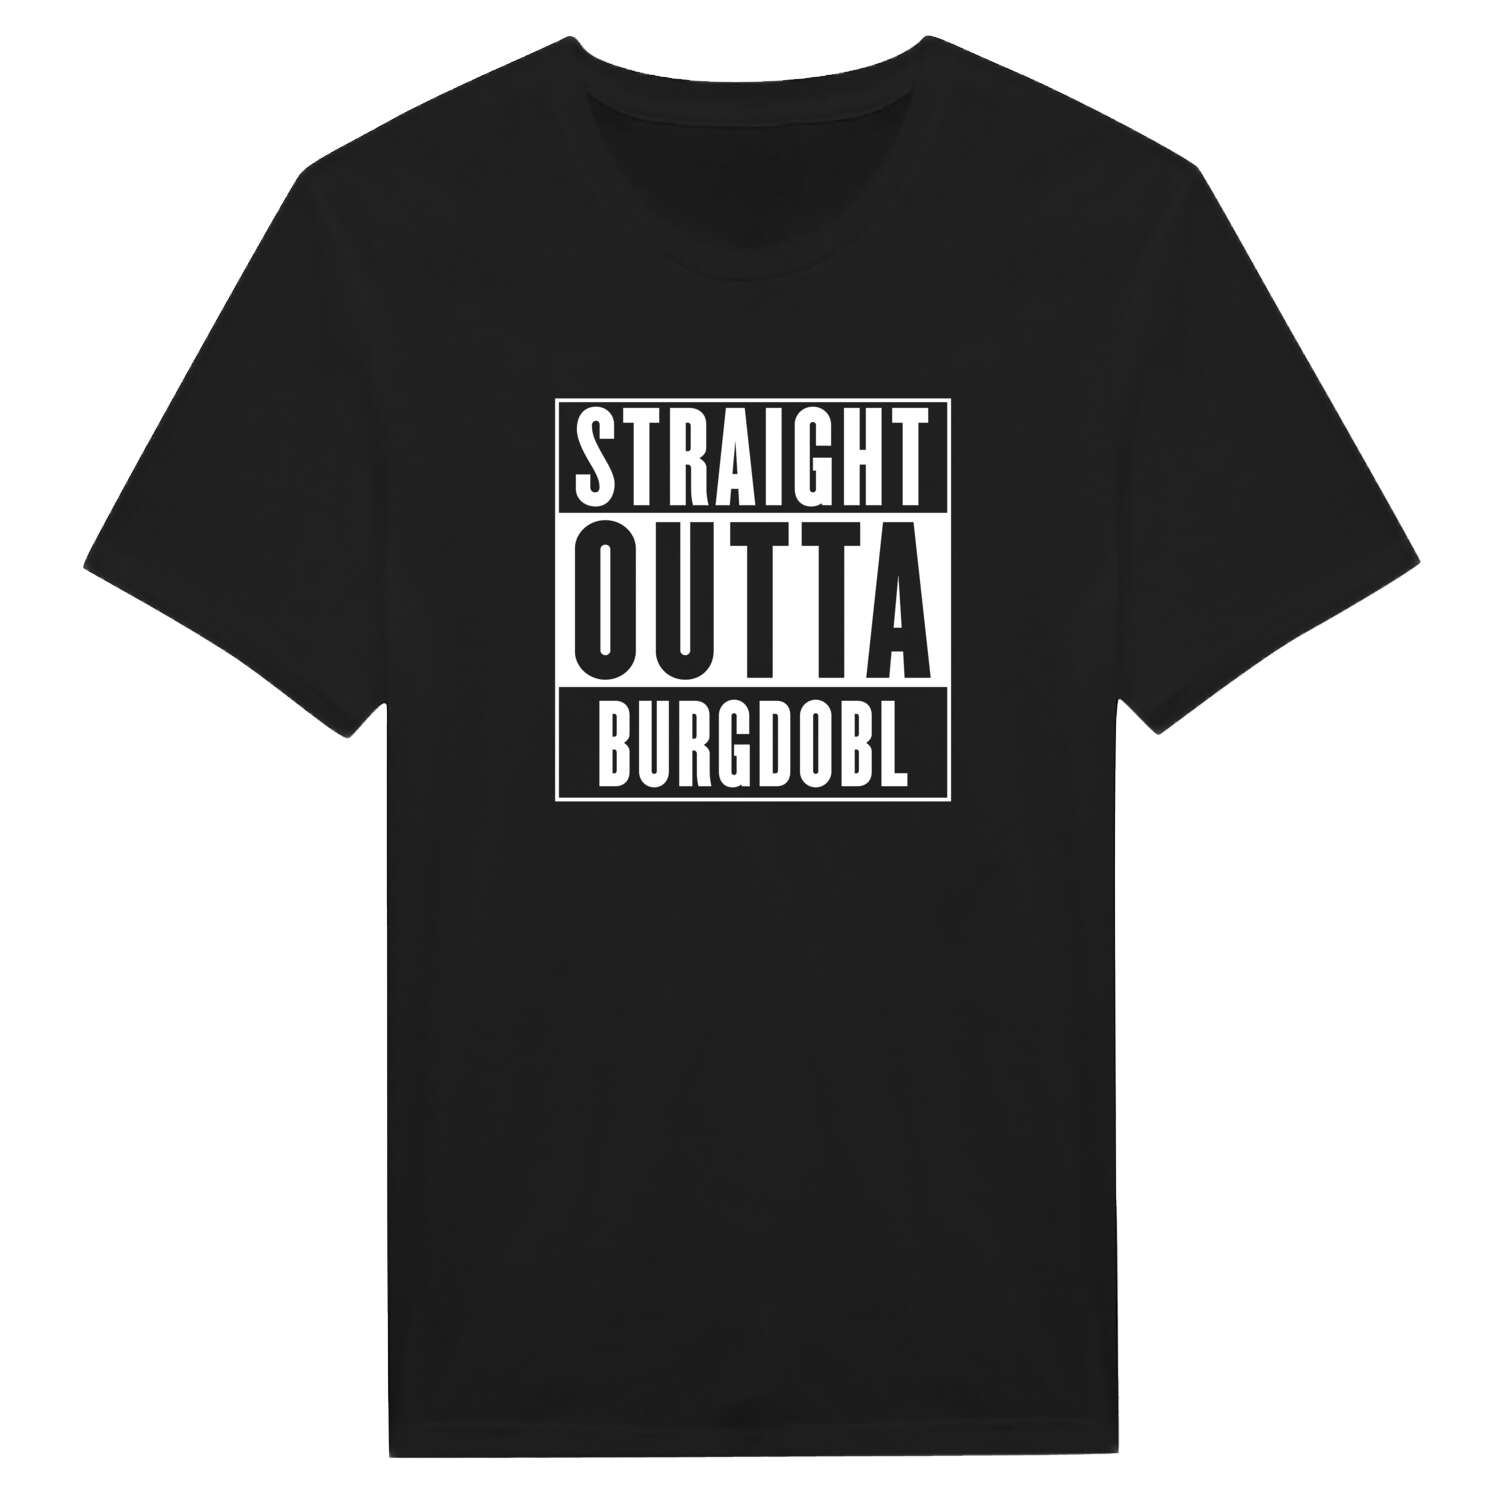 Burgdobl T-Shirt »Straight Outta«